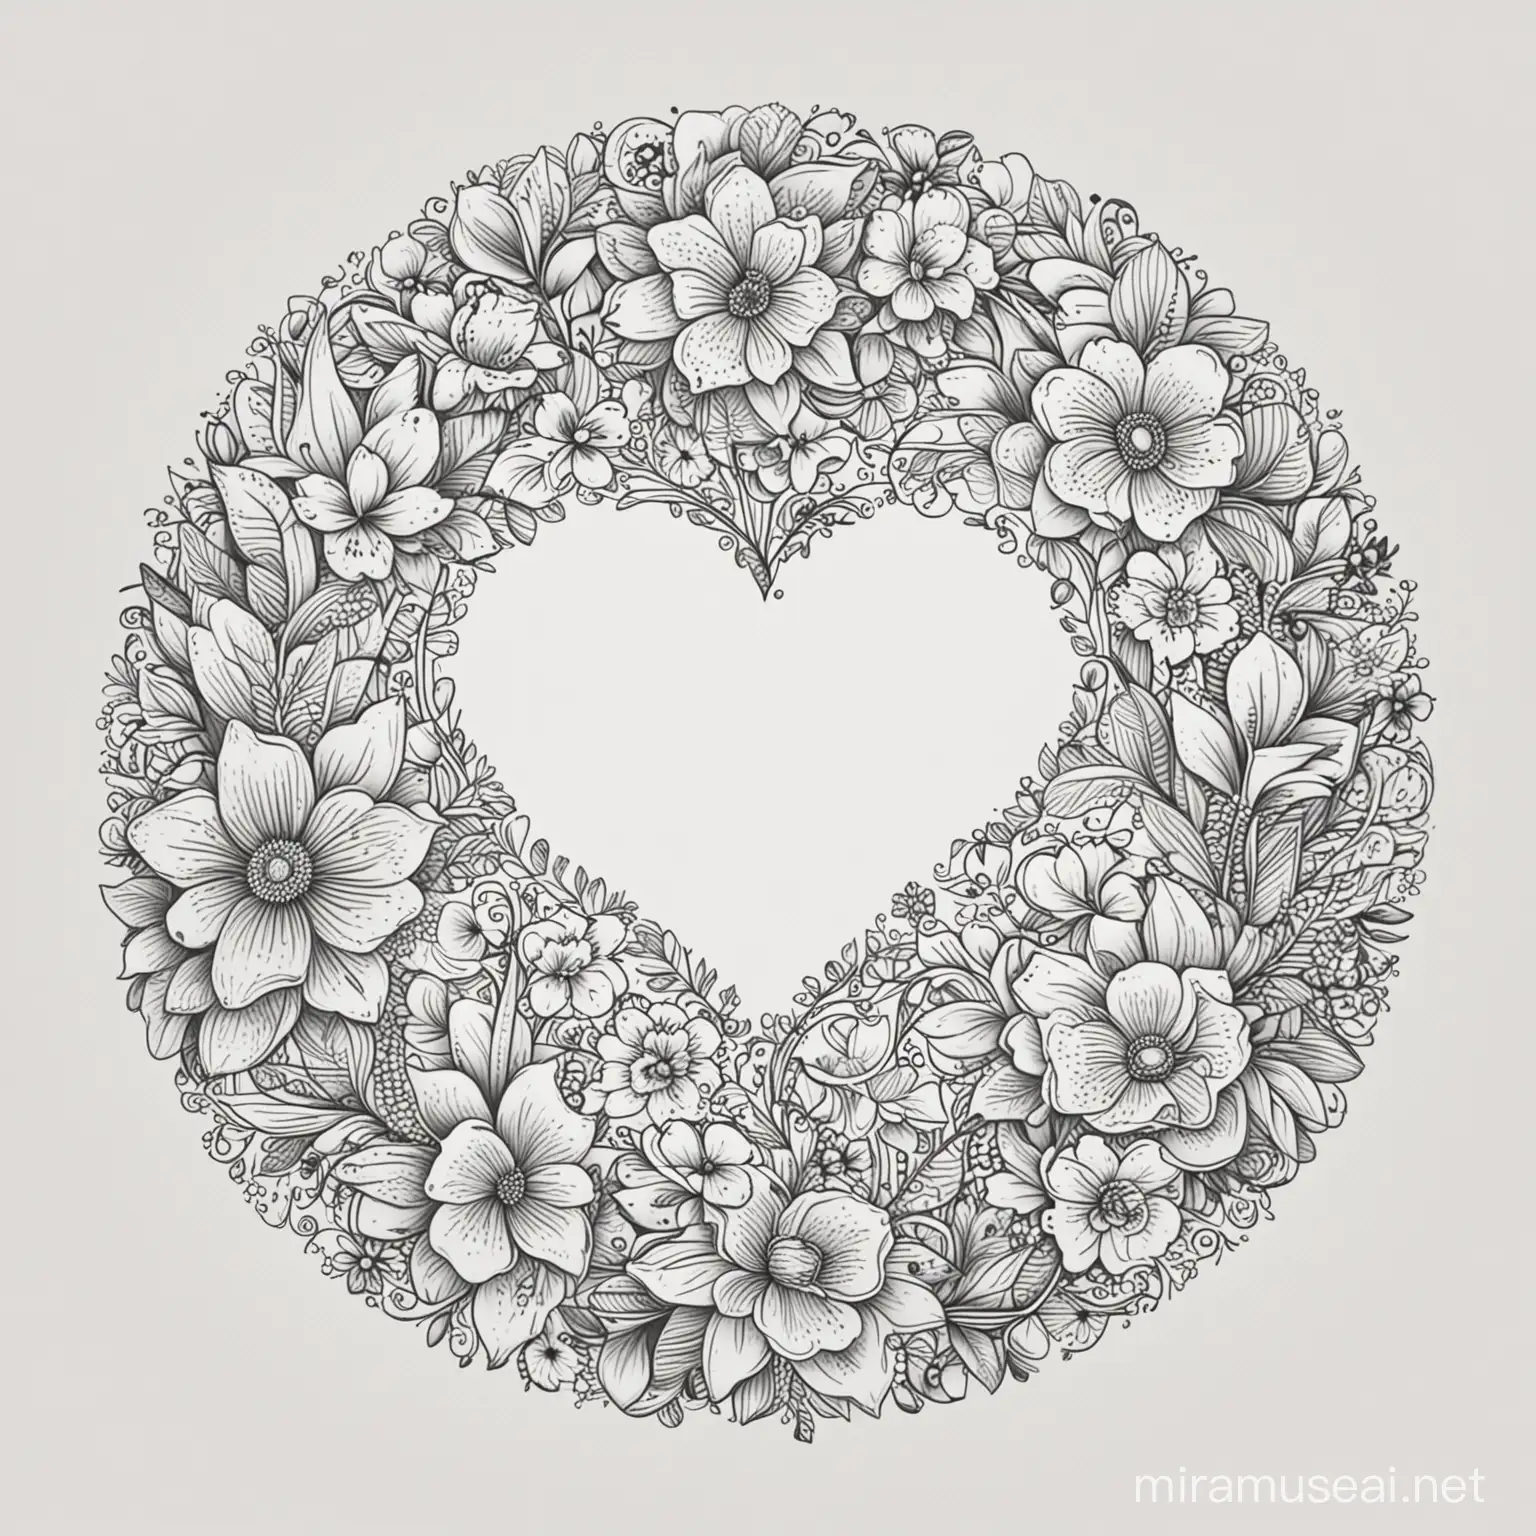 Floral Line Art in Circle Hearts Vector Design on White Background